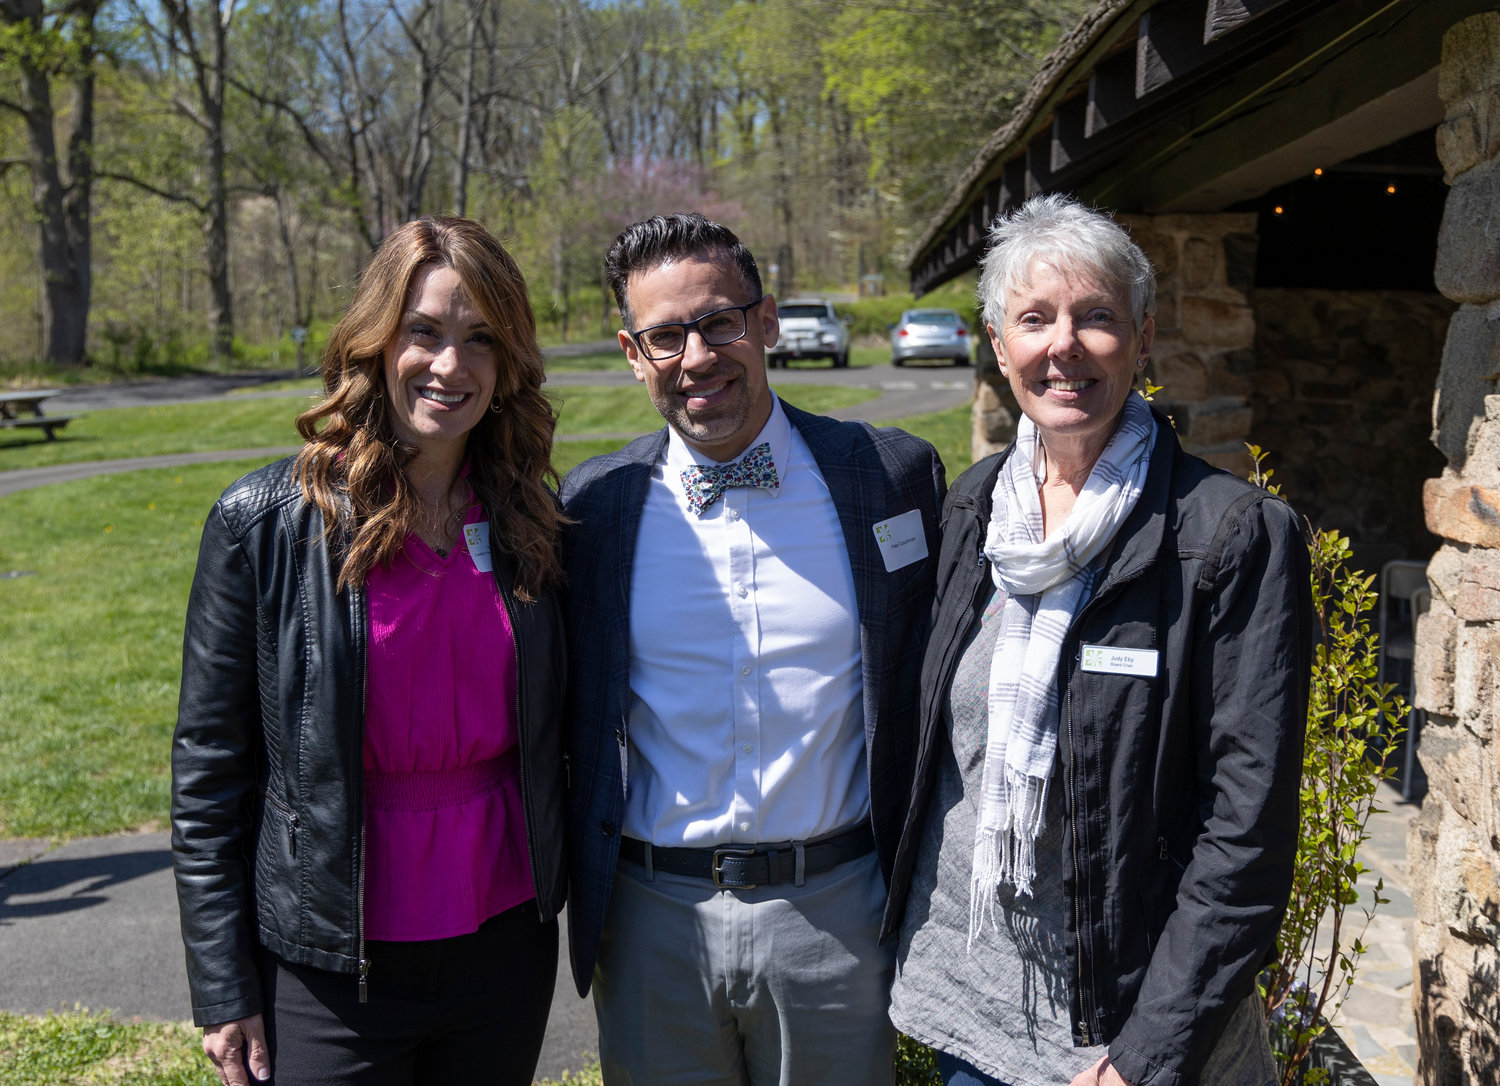 Rebecca Kelly, Capital Health, with Pete Couchman, Bowman’s Hill executive director, and Judy Eby, board chair.